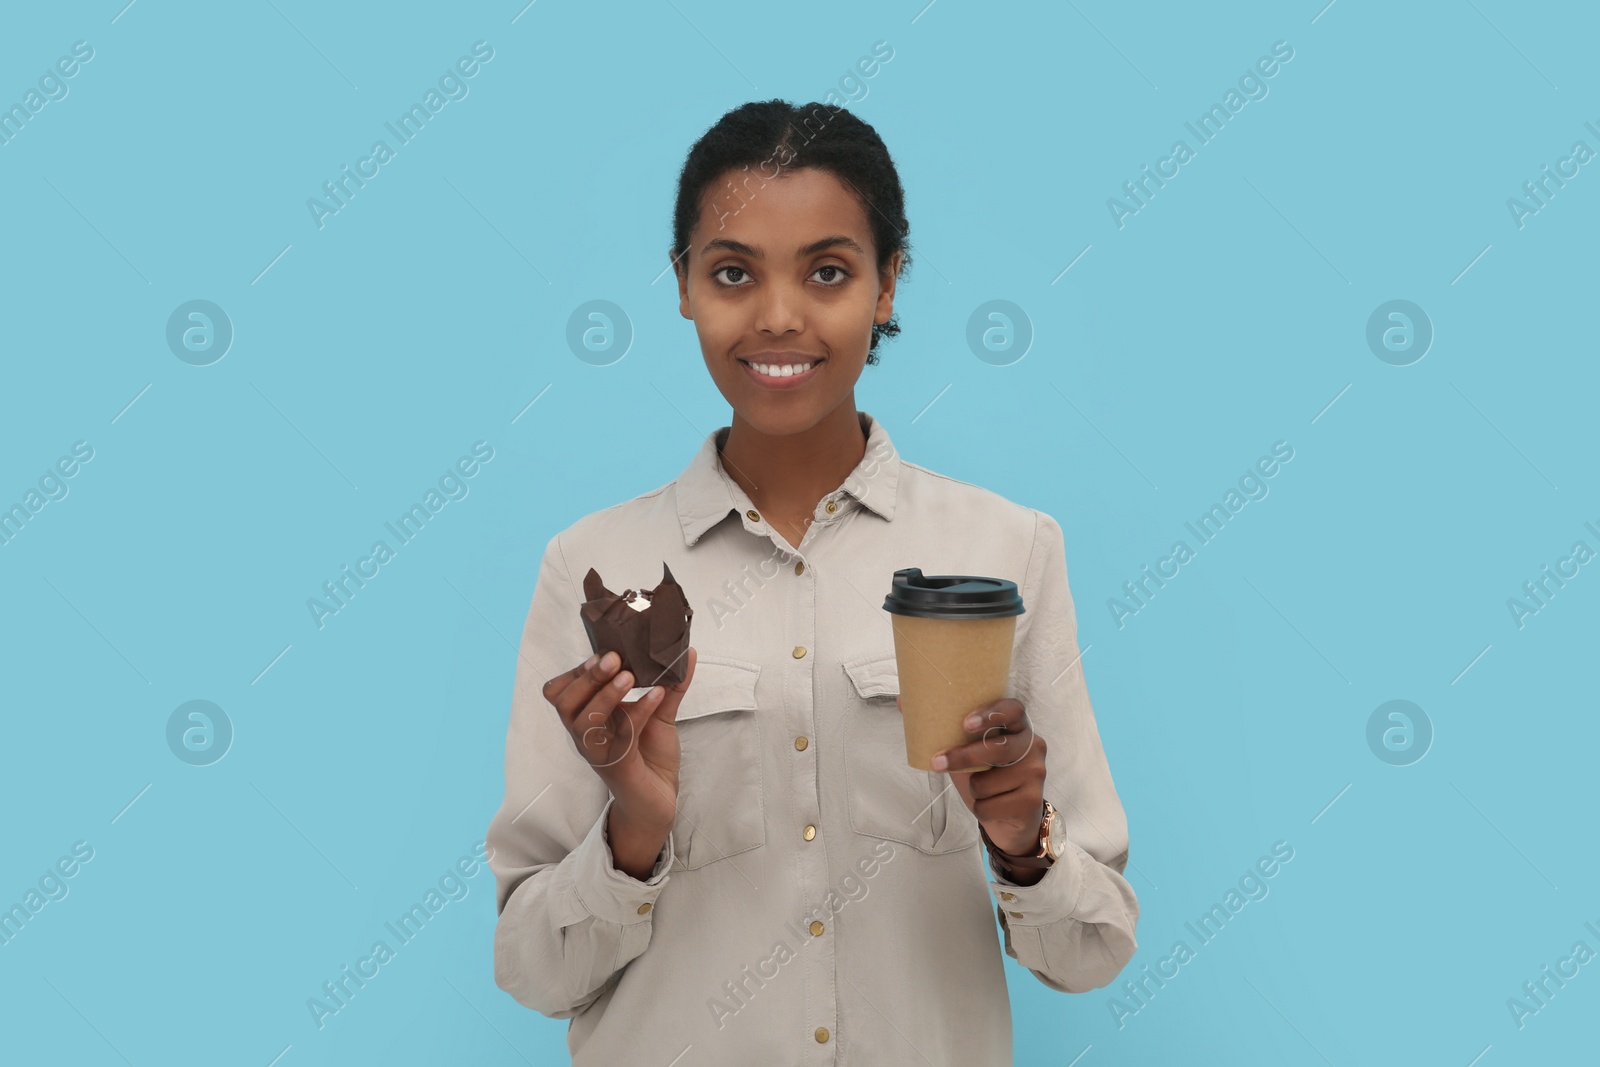 Photo of African American intern with cupcake and cup of drink on light blue background